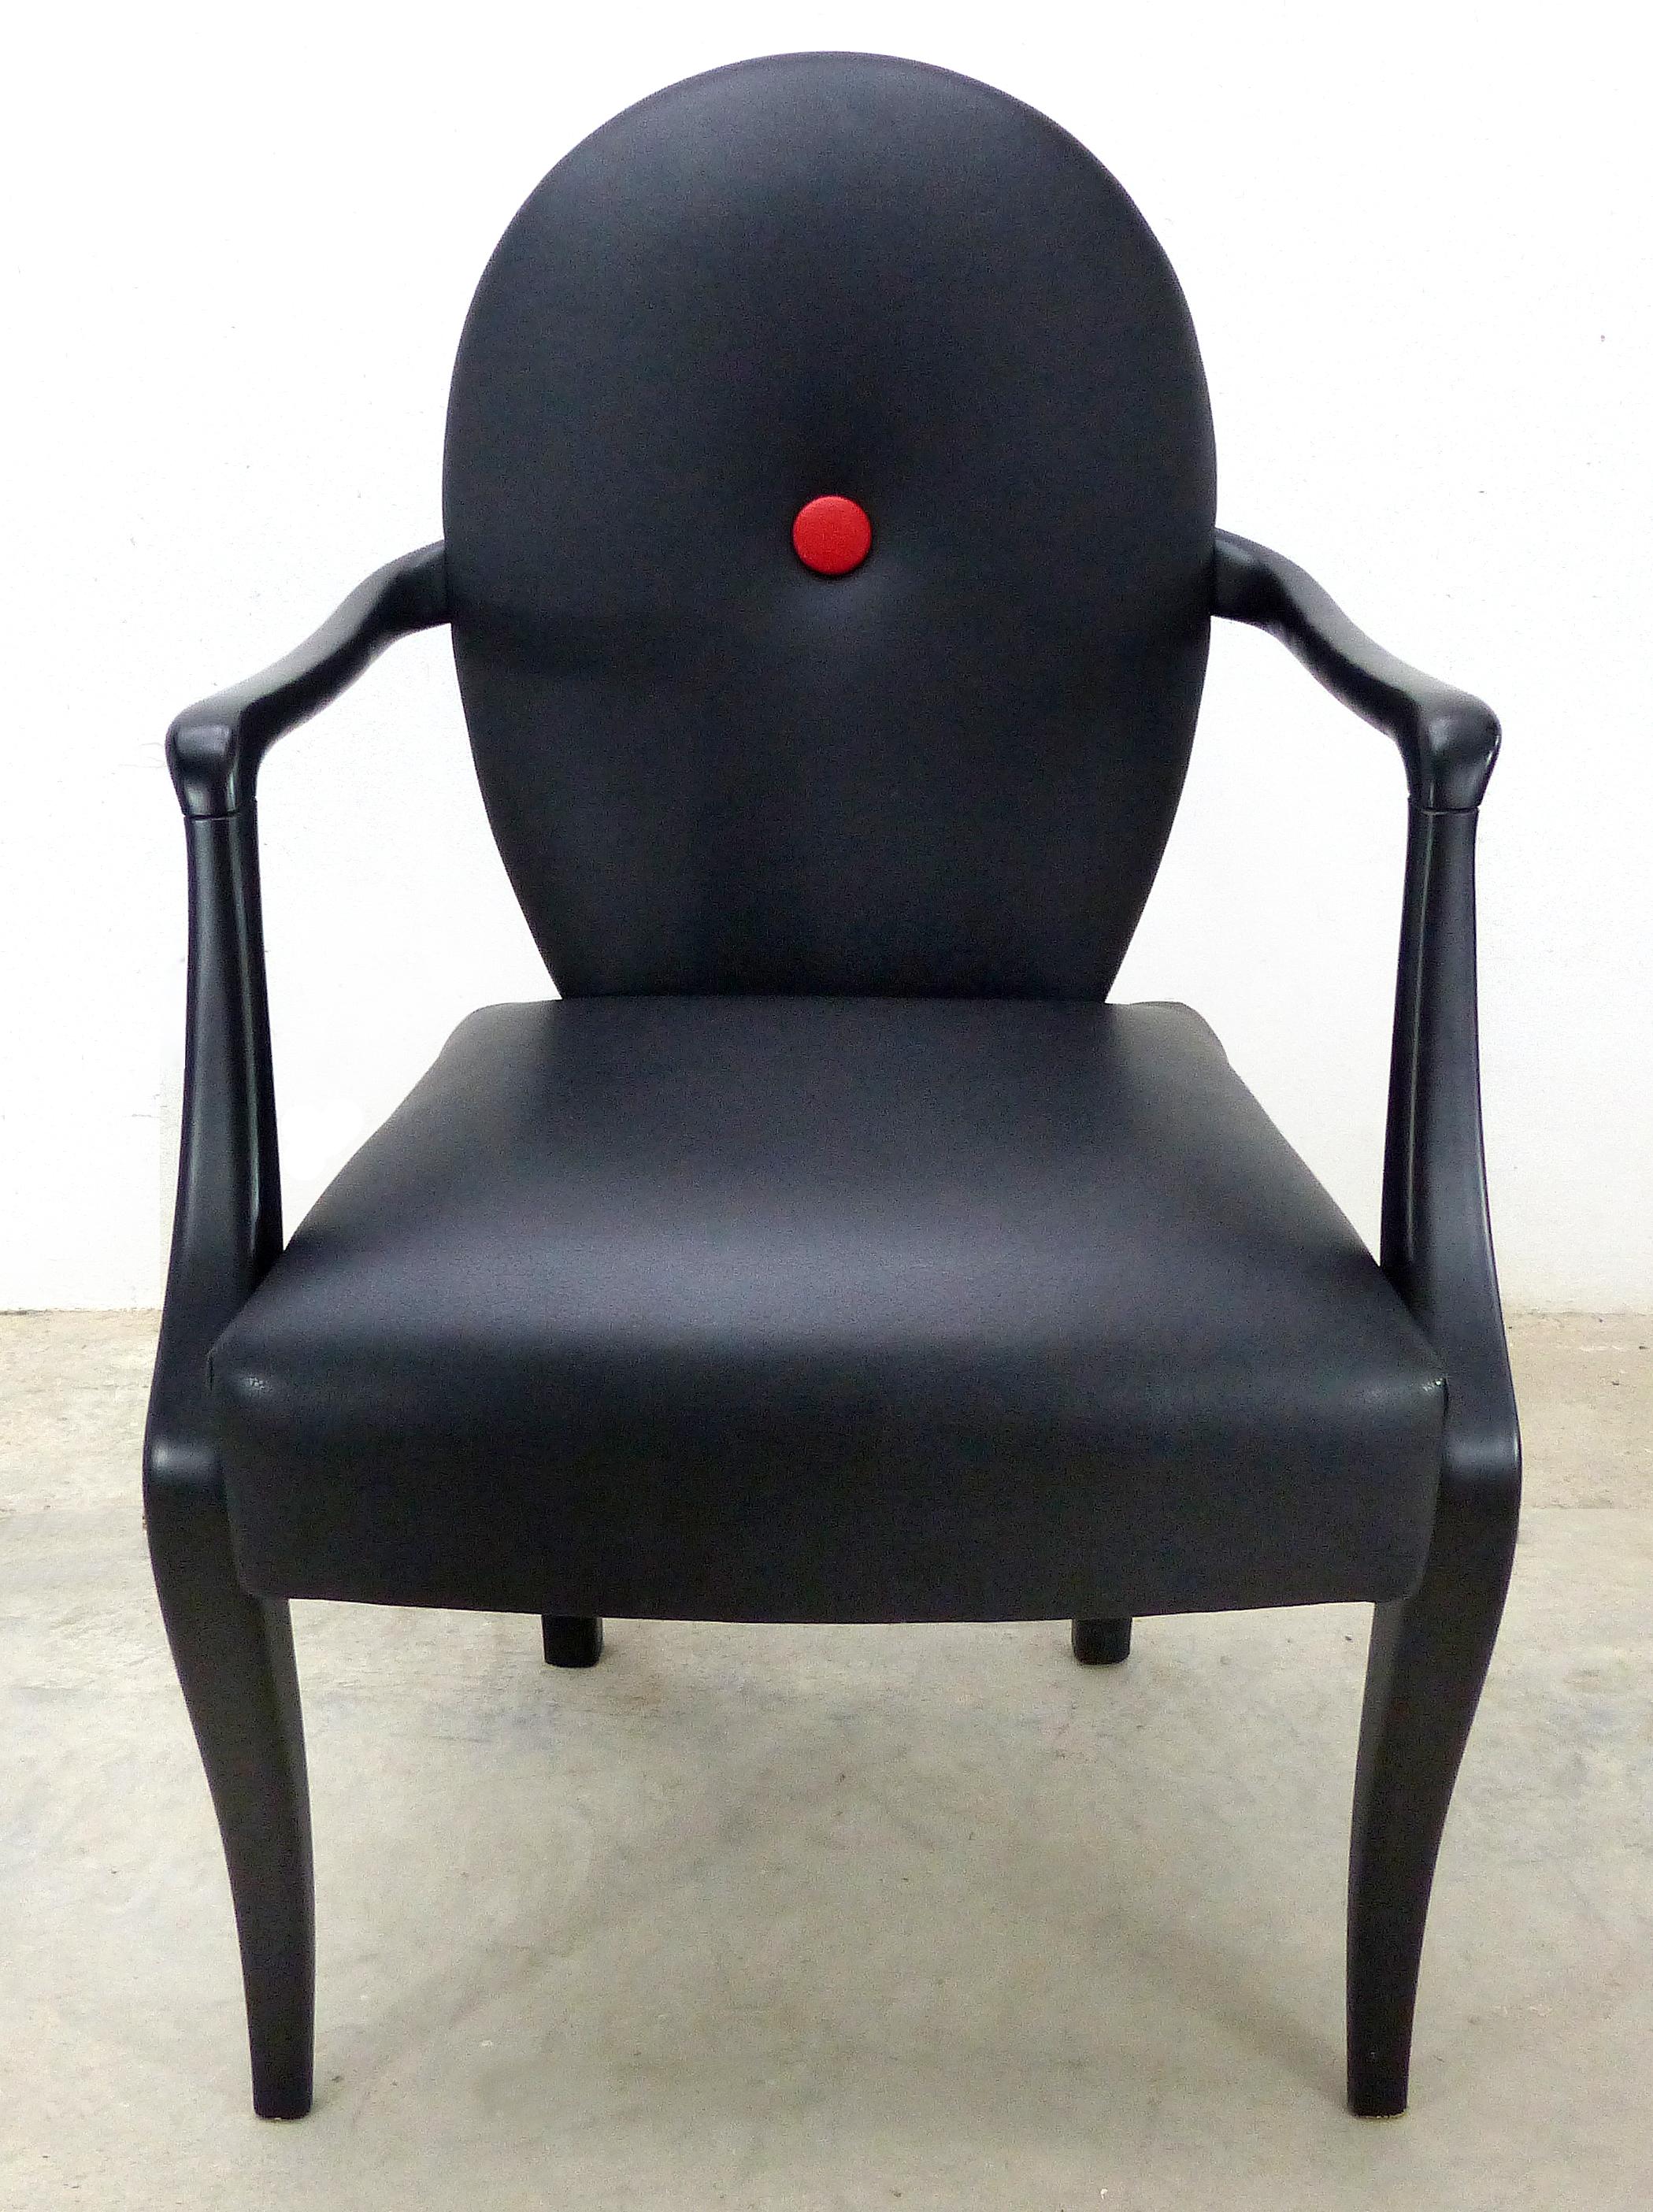 Offered for sale is a gracefully designed black leather chair from Belloni. Belloni is an Italian company that produces high-level craftsmanship with fine work and high-quality materials and attention to detail. The first workshop of the Belloni’s